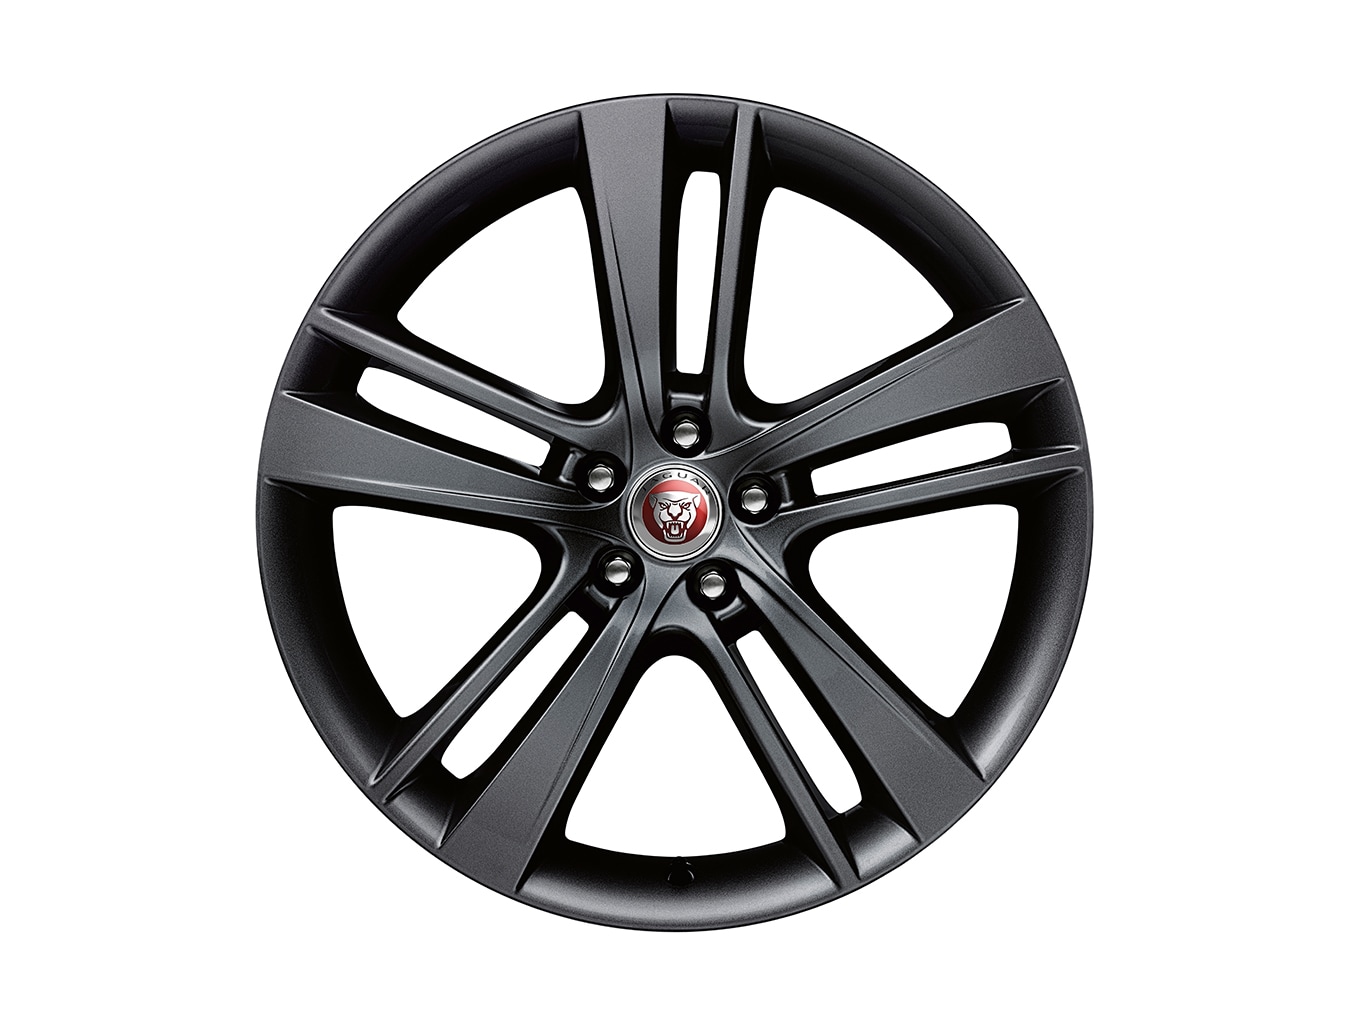 20" Style 5041, Gloss Black, front